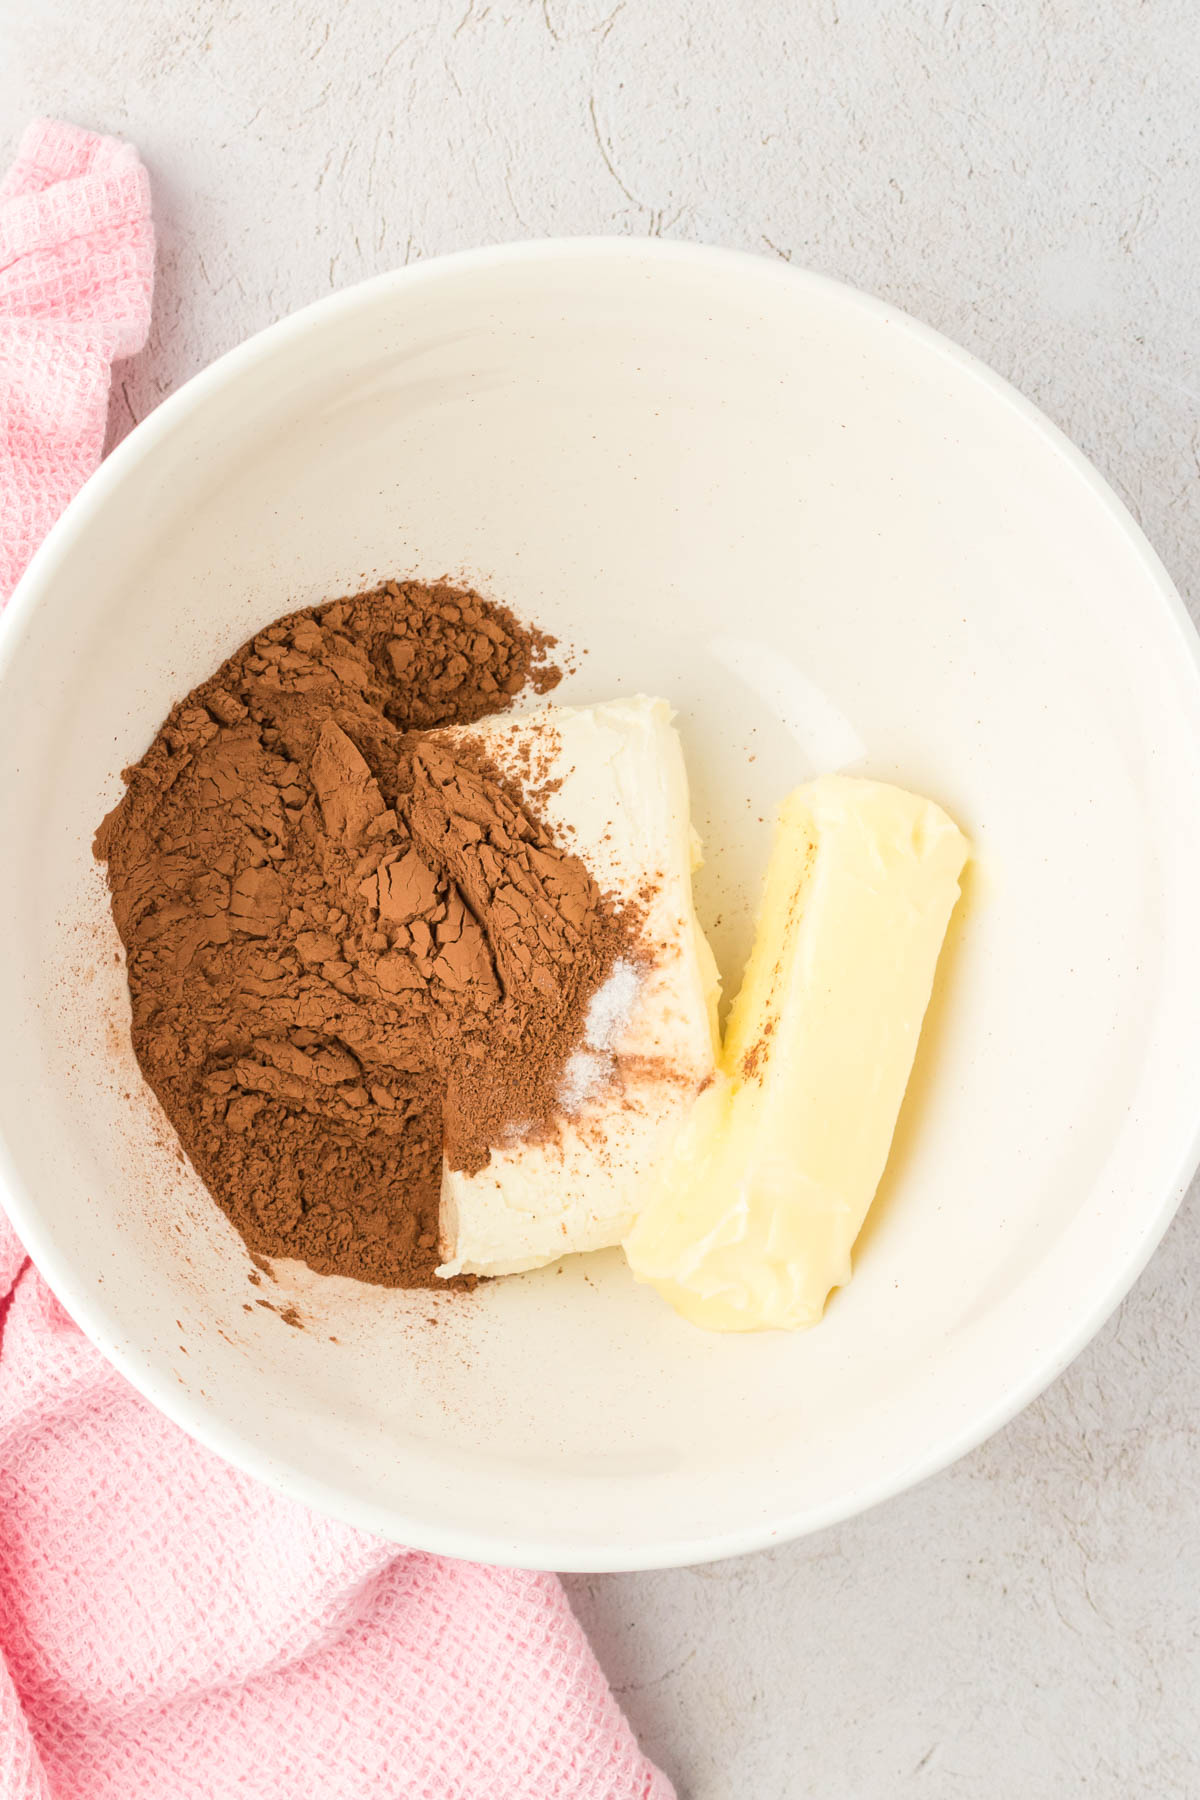 Butter, cream cheese, and cocoa powder in a mixing bowl.